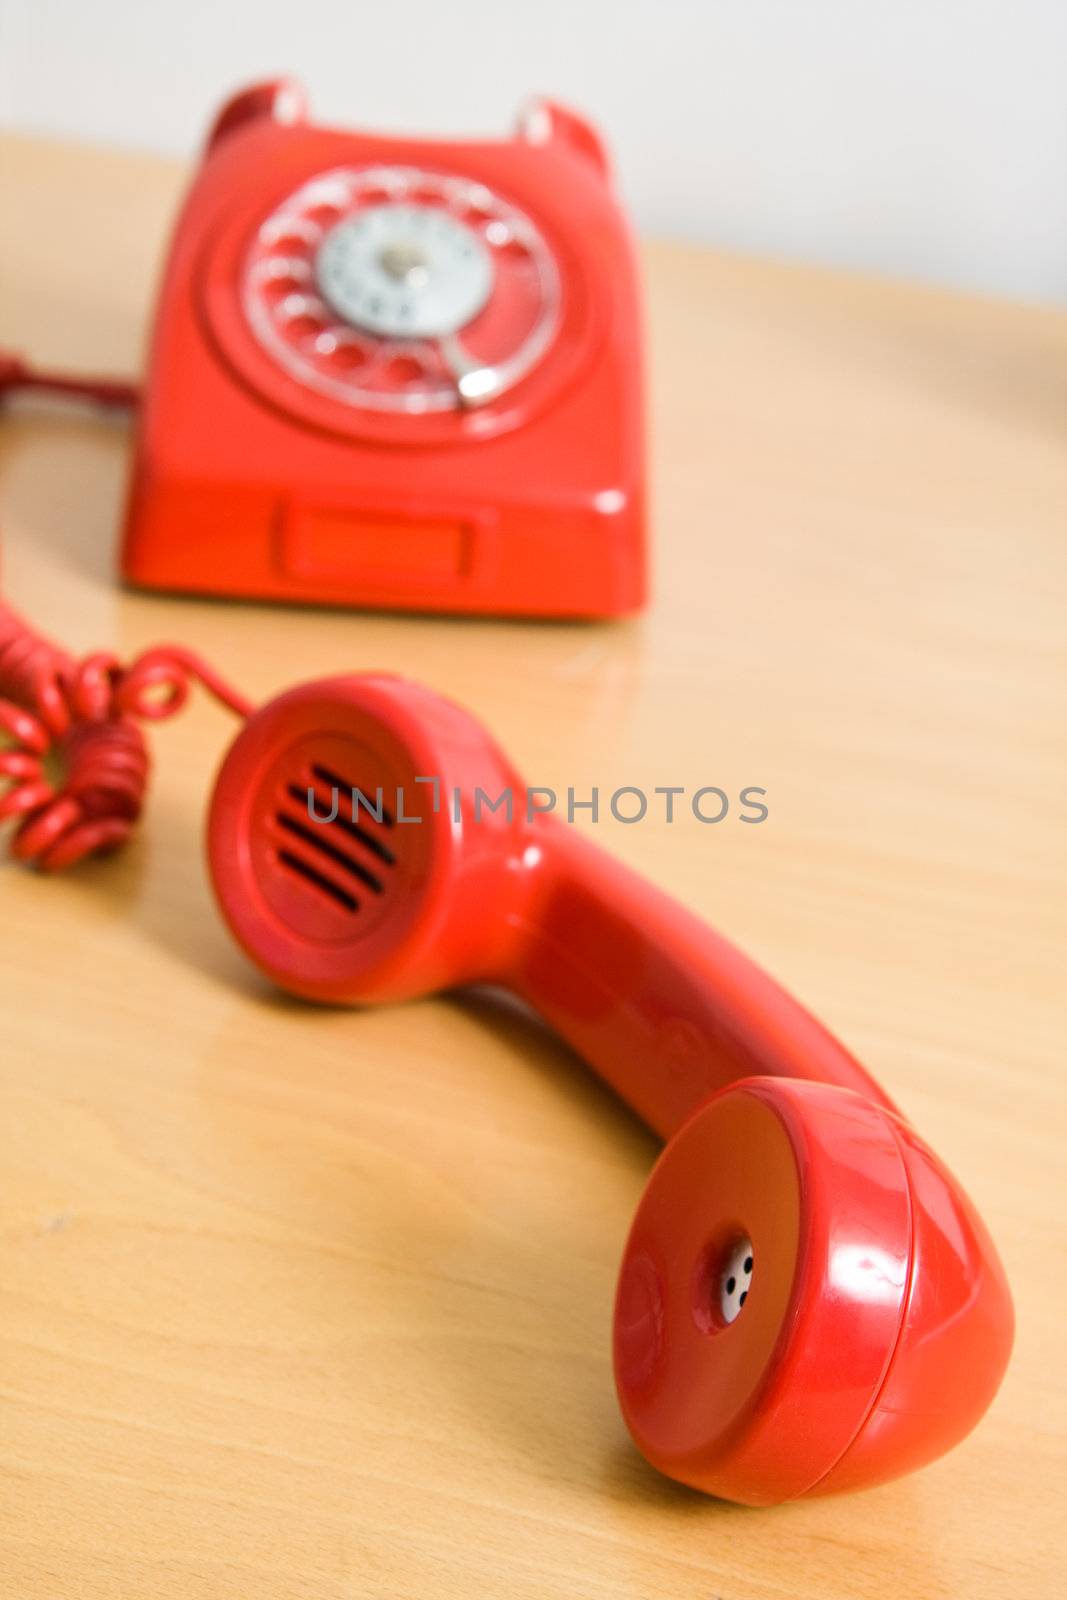 Vintage red telephone  by ctacik